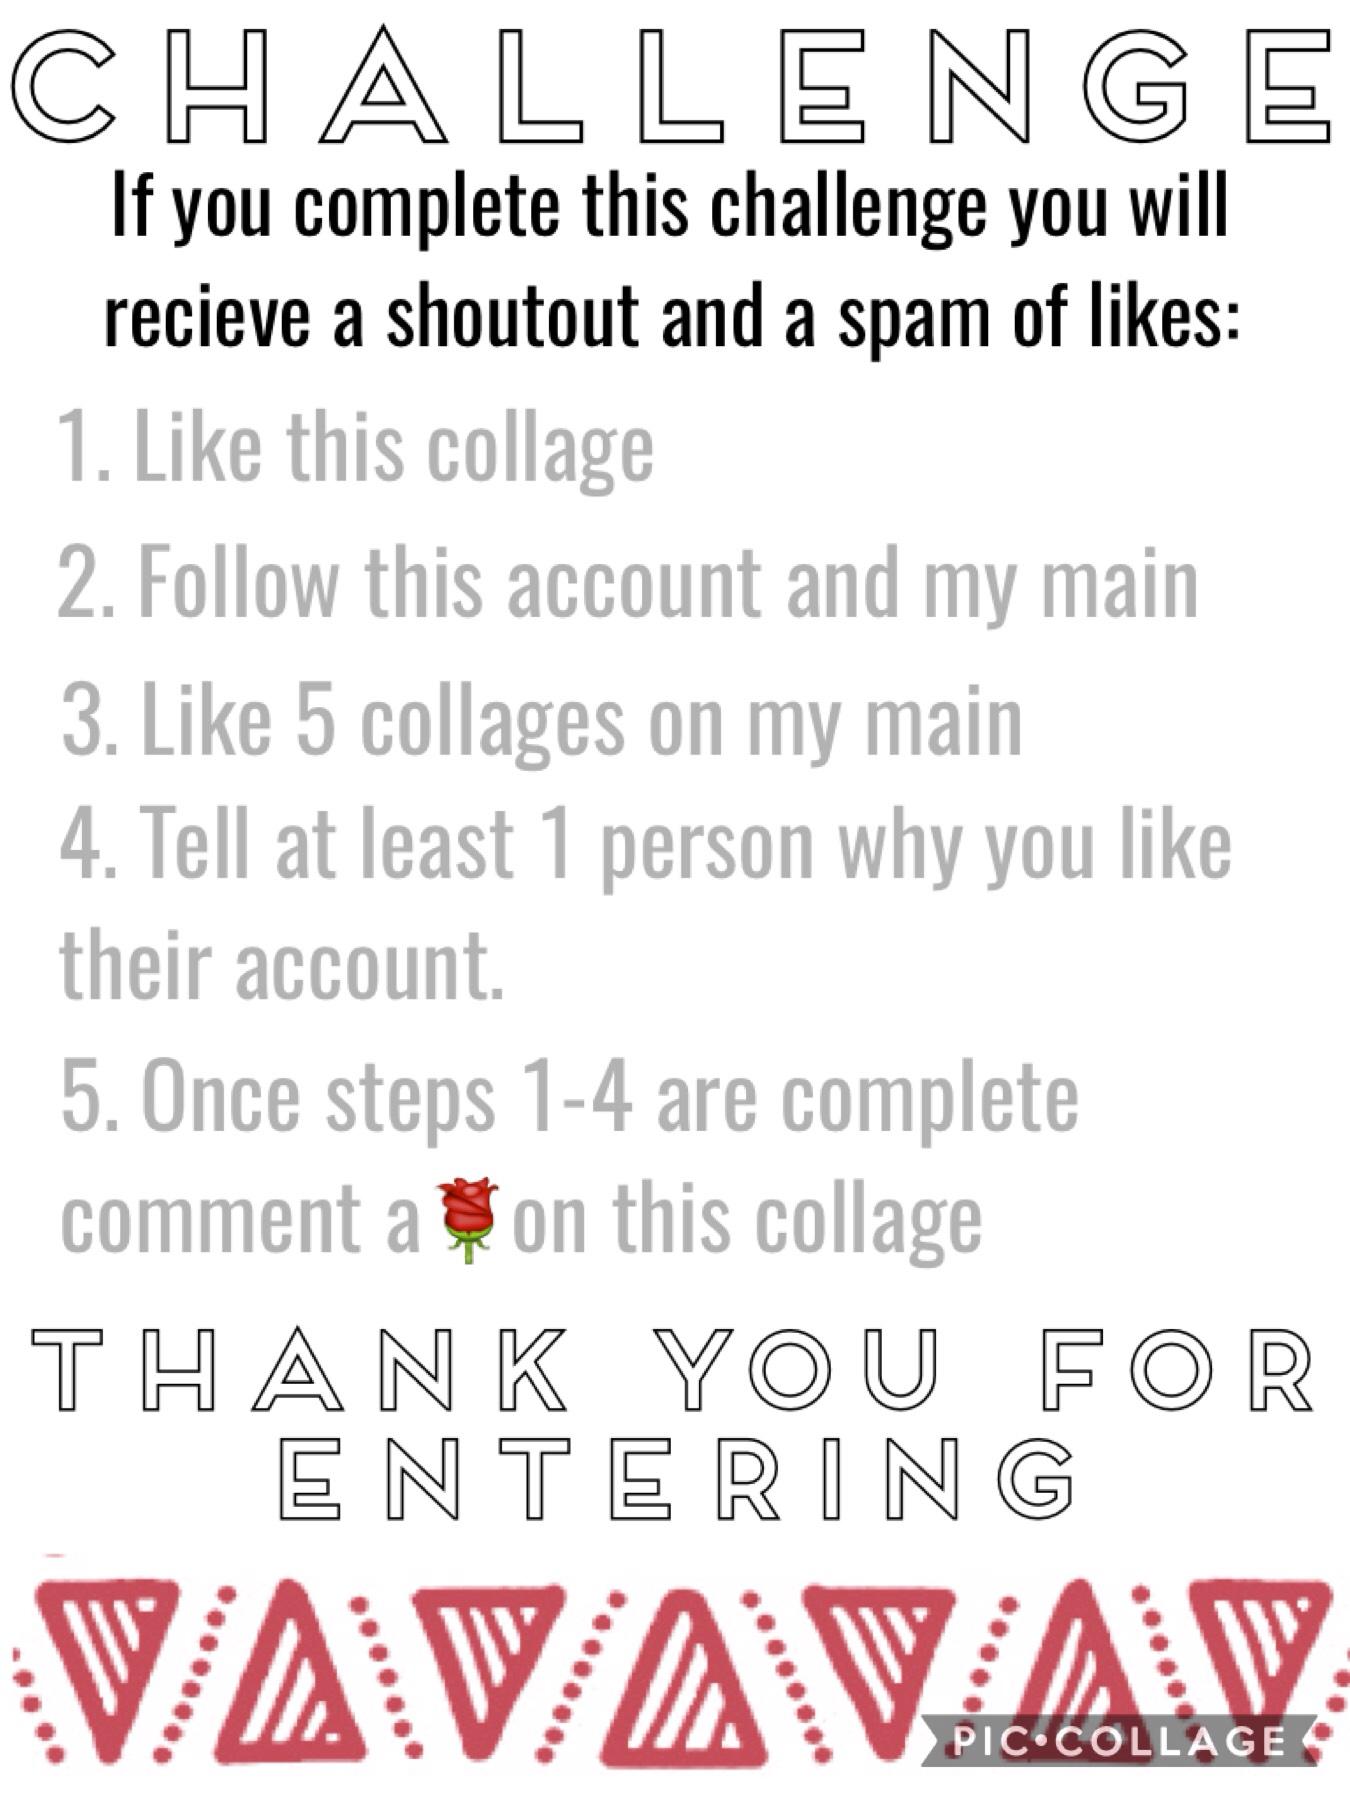 Please enter. I love you all 💕